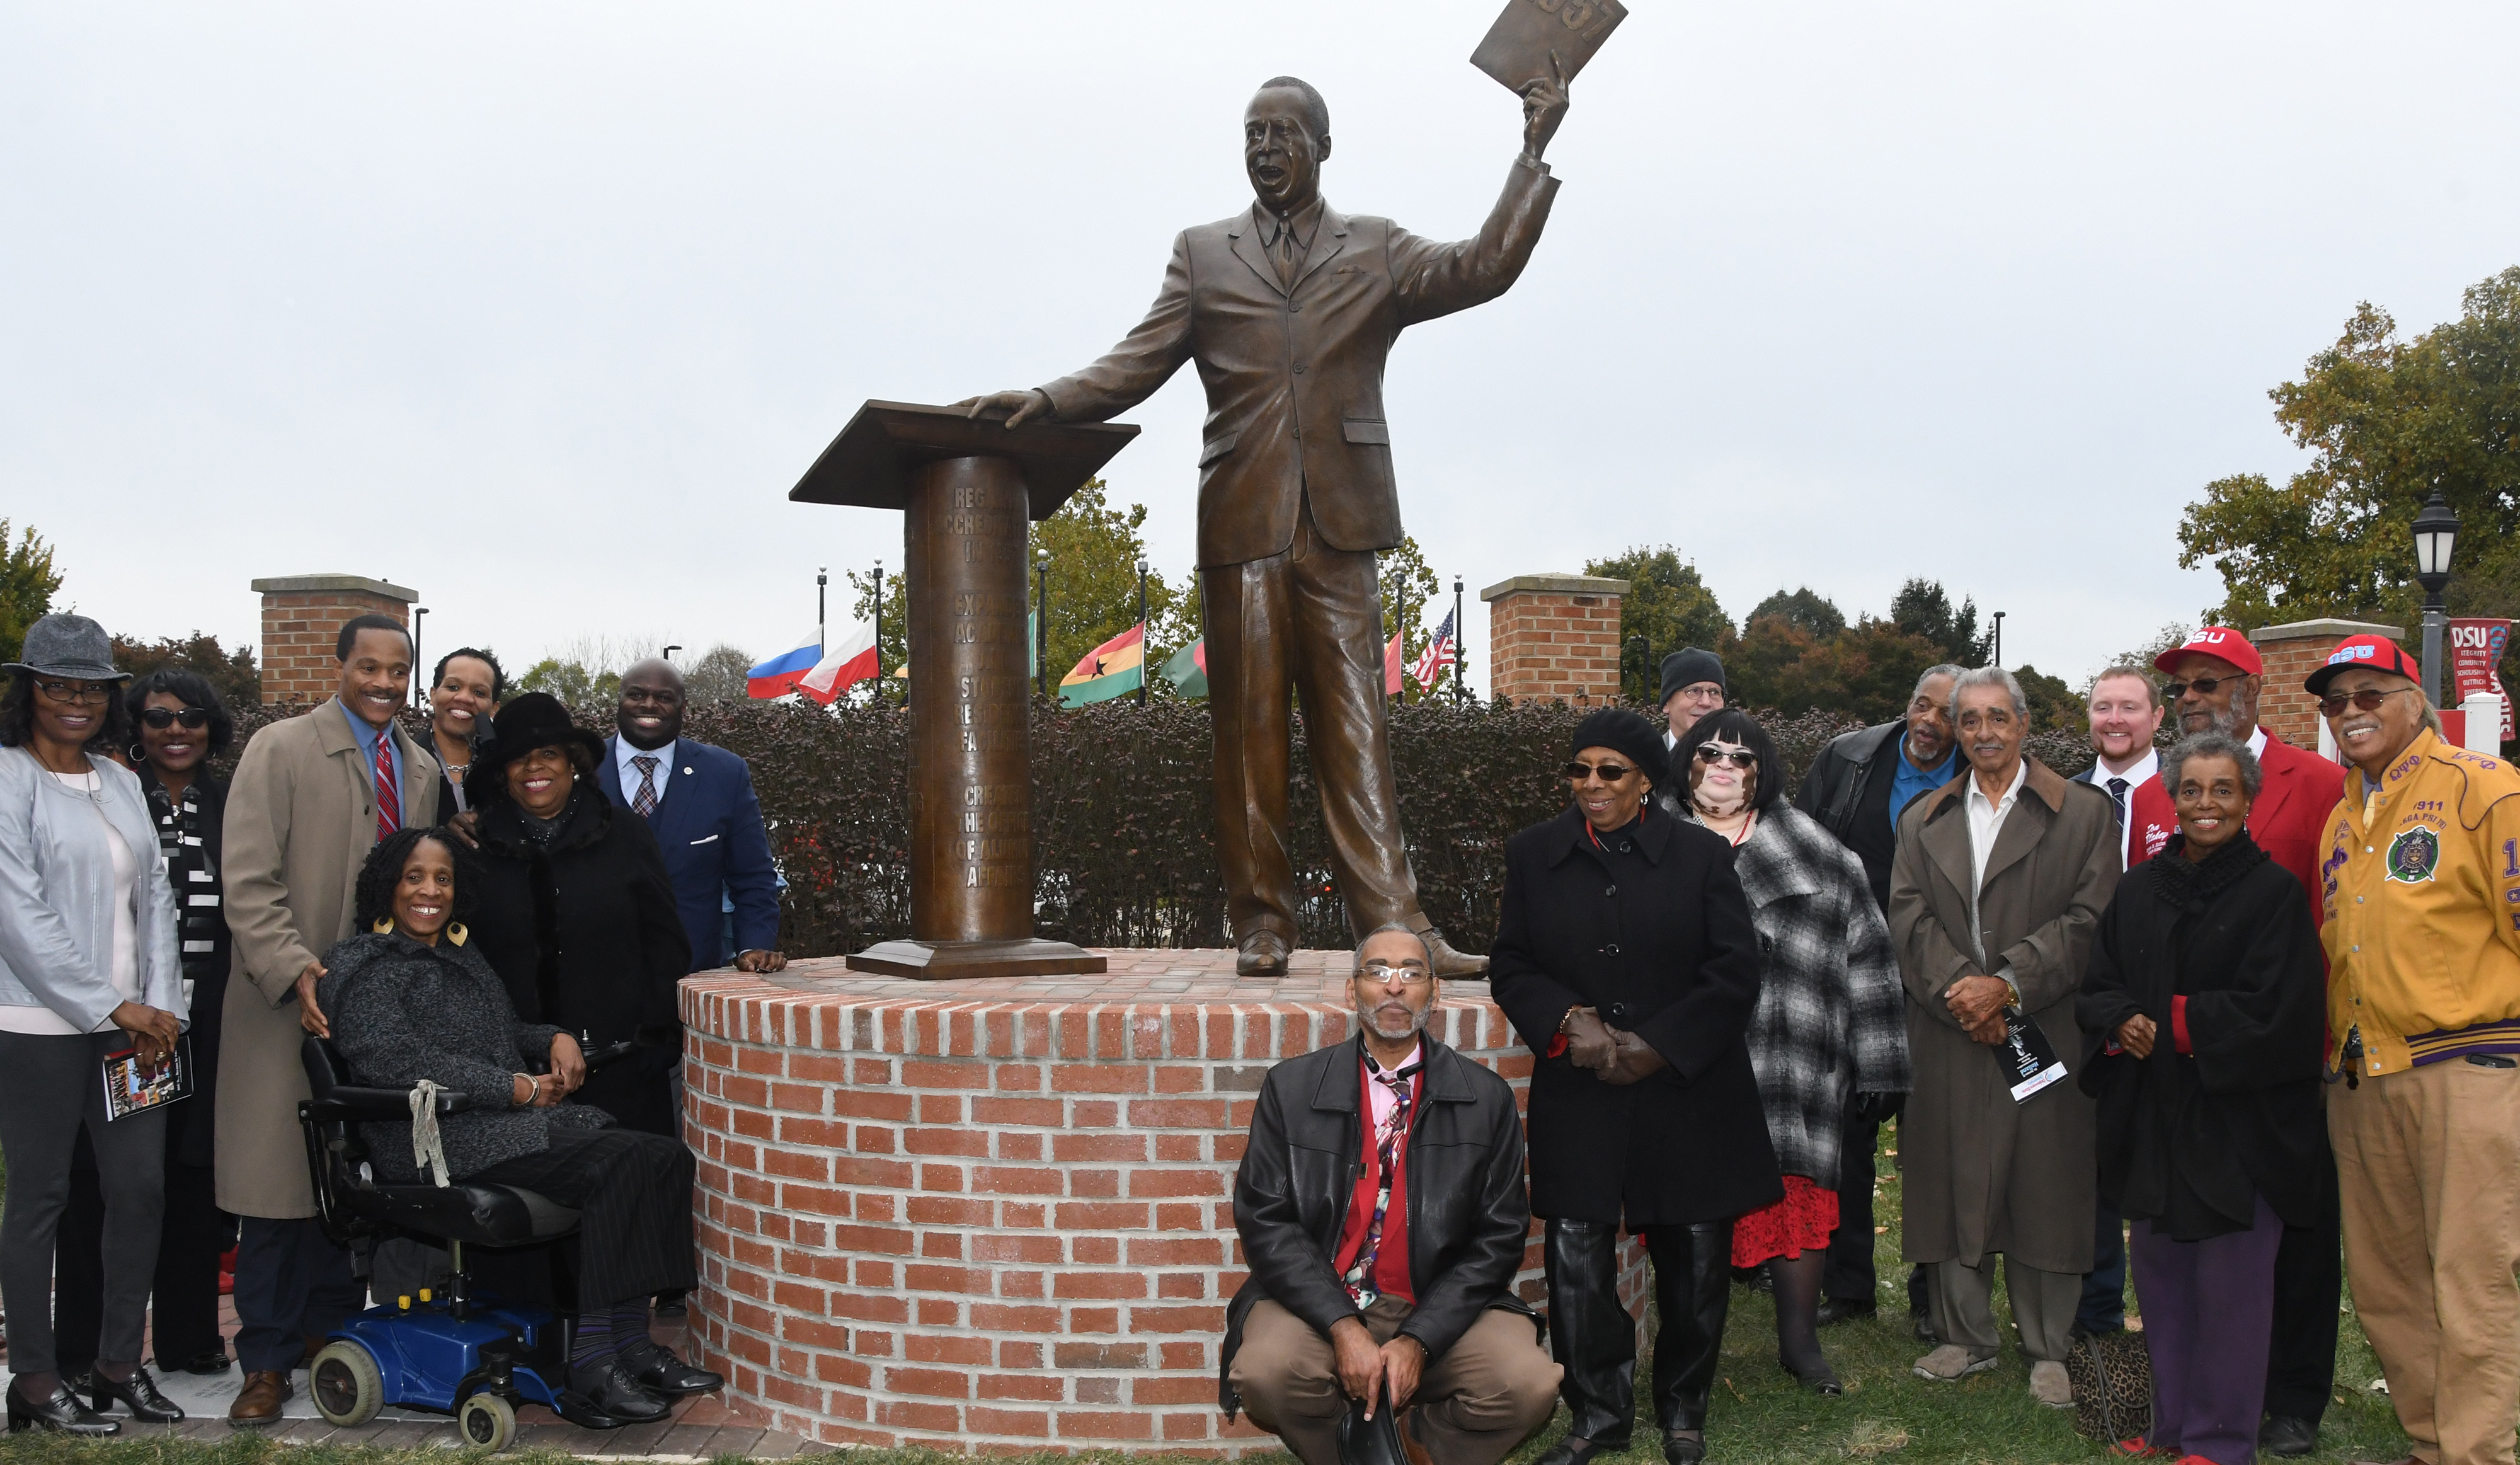 A group which included the Holland children (now adults), University President Wilma Mishoe, Board of Trustees members and the Holland Memorial Statue Committee, posed with the statue of Dr. Jerome H. Holland after the Oct. 26 Dedication Ceremonty